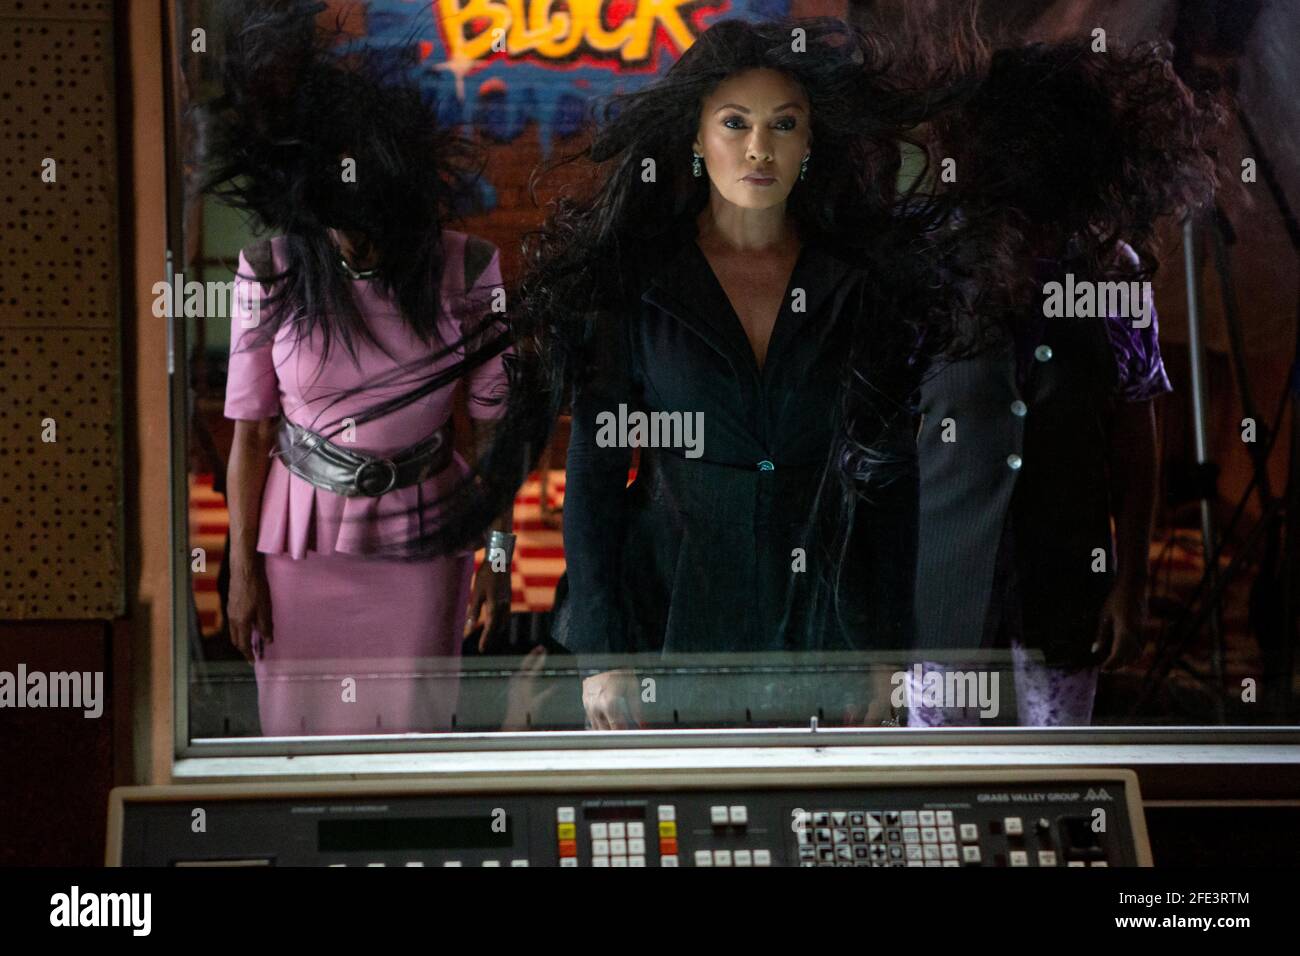 VANESSA WILLIAMS in BAD HAIR (2020), directed by JUSTIN SIMIEN. Credit: Culture Machine / Sight Unseen Pictures / Album Stock Photo